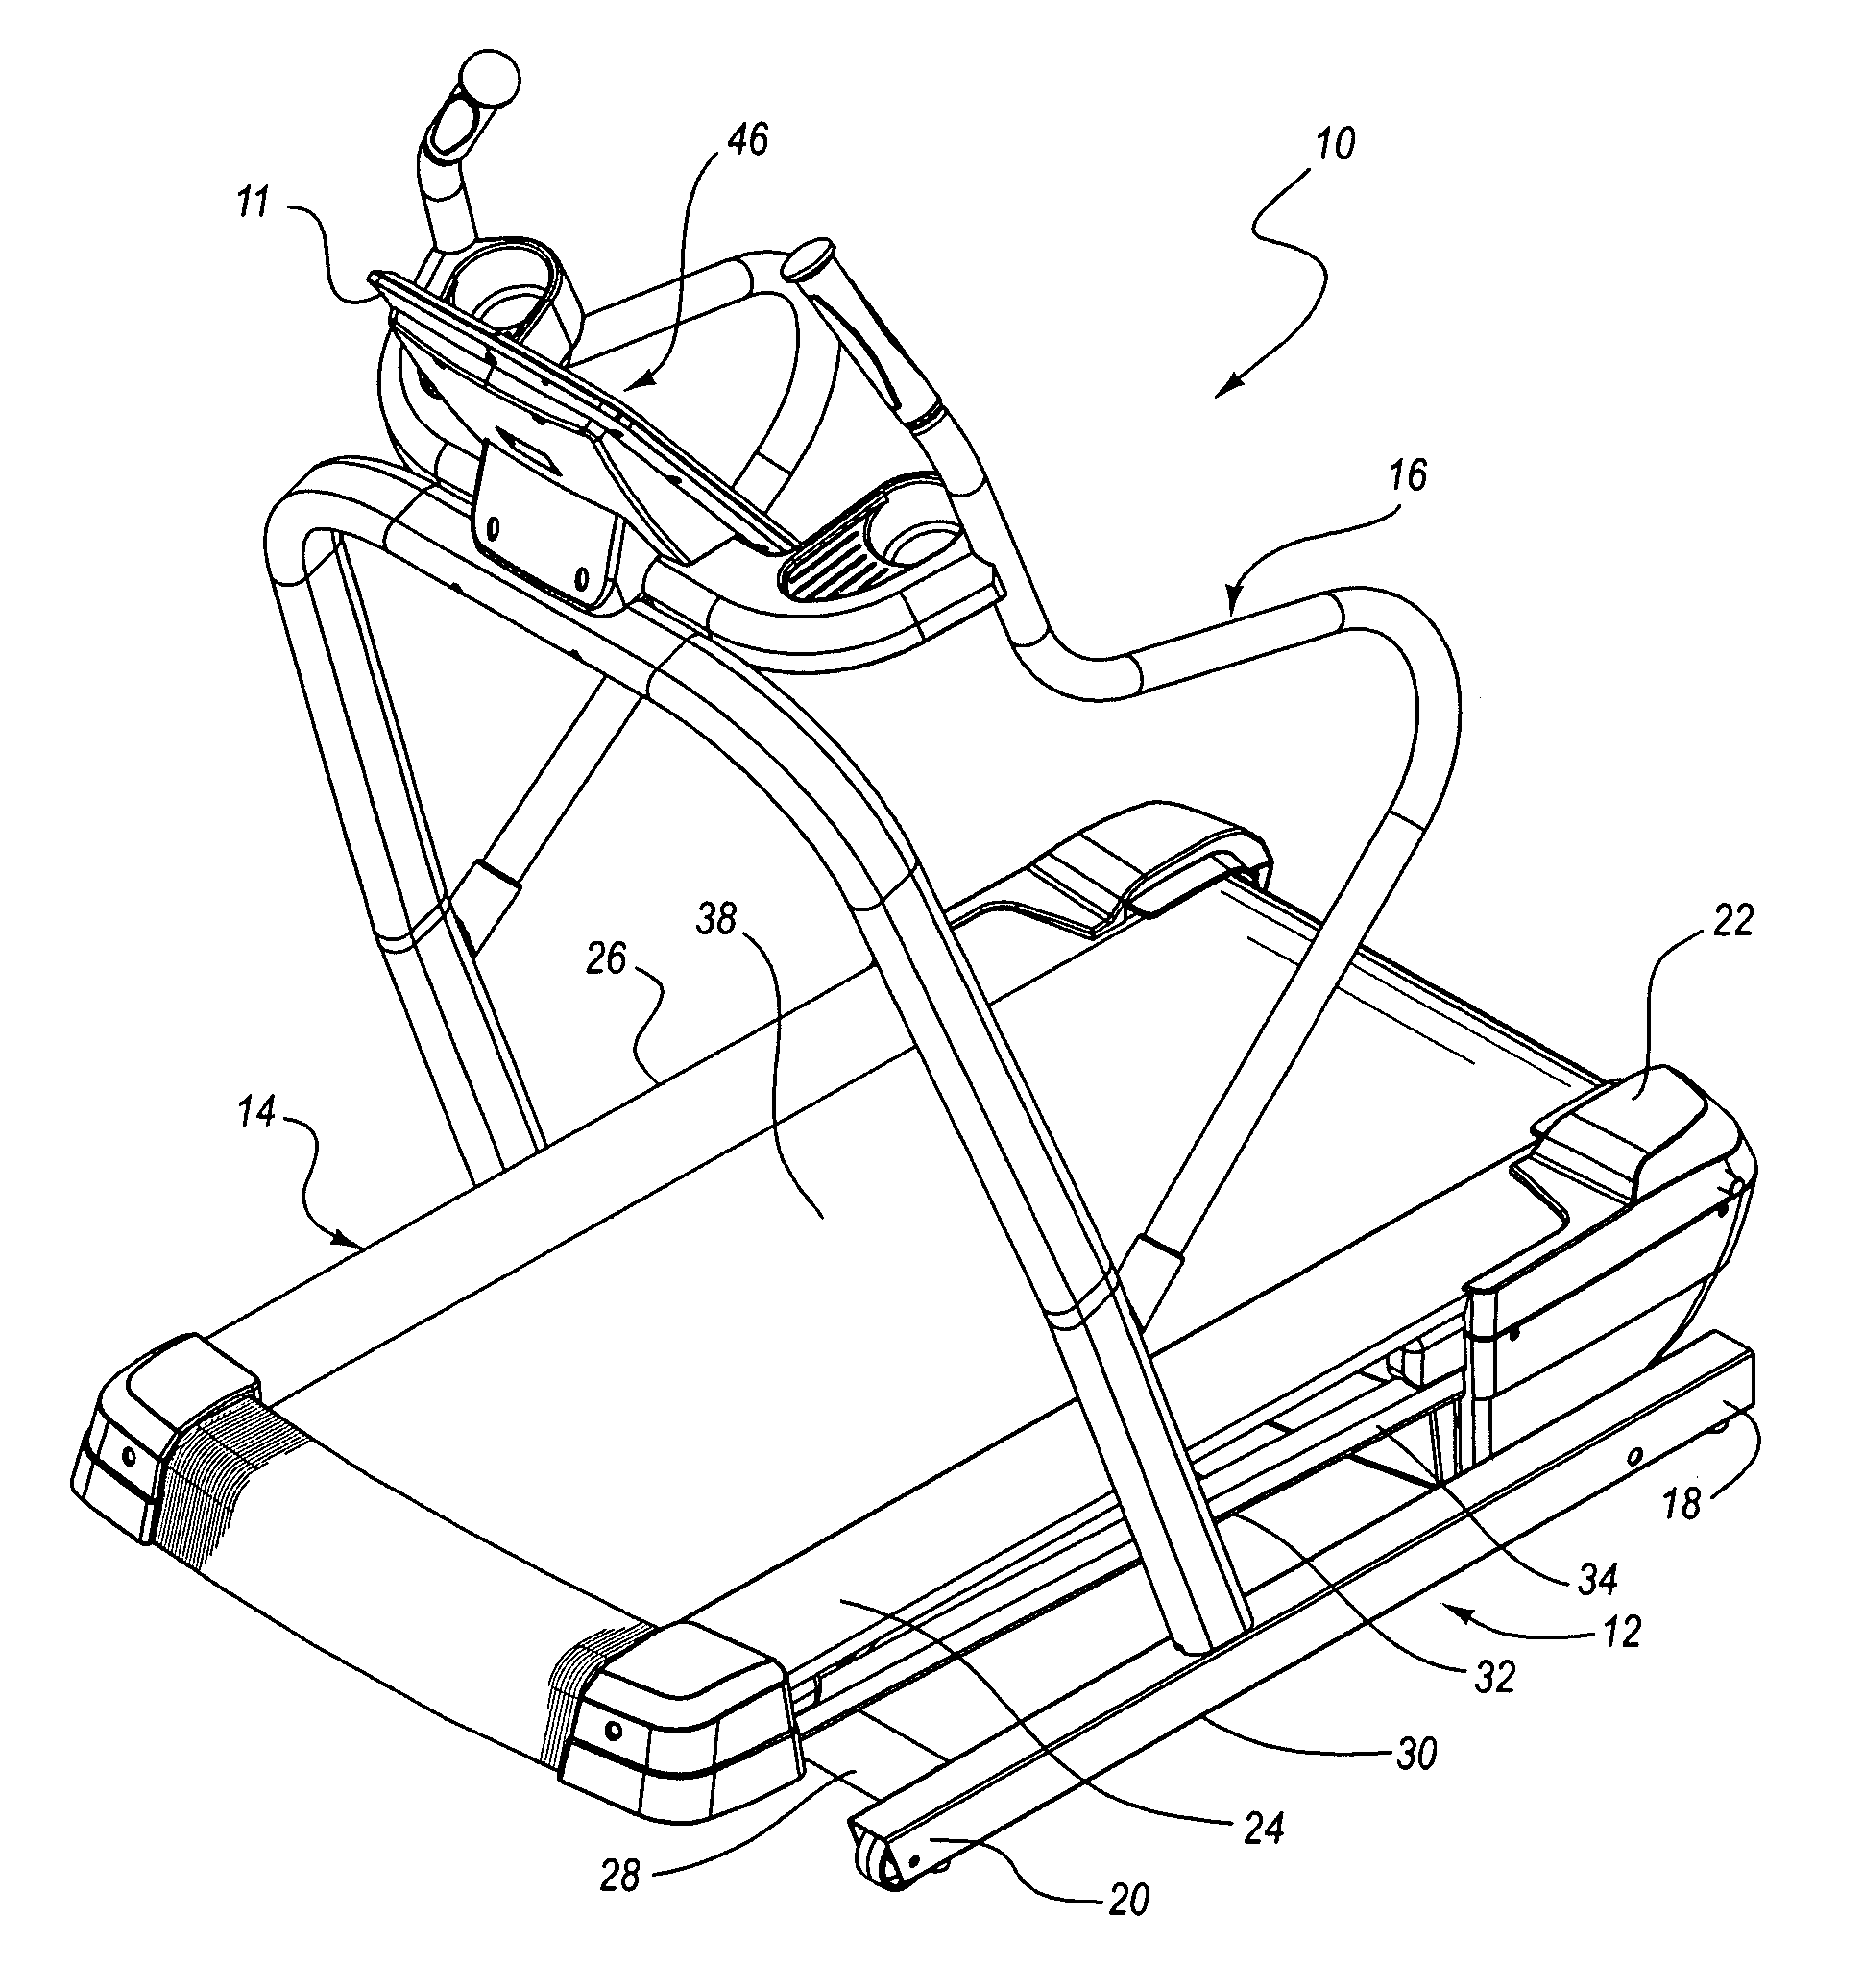 Inclining treadmill with magnetic braking system